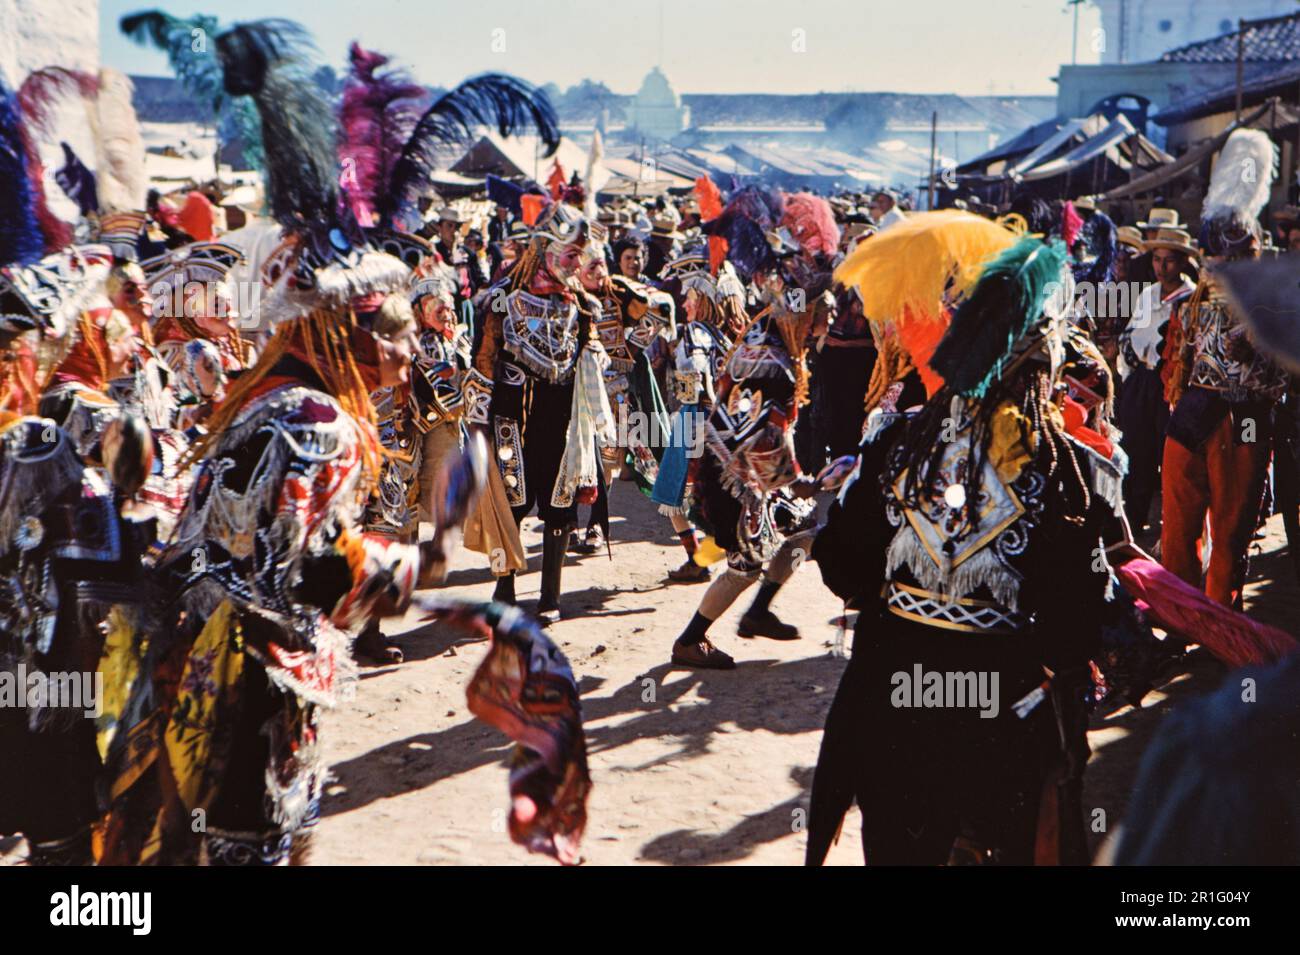 Dancers in the streets of Chichicastenango Guatemala, likely a Mayan celebration ca. 1962 Stock Photo